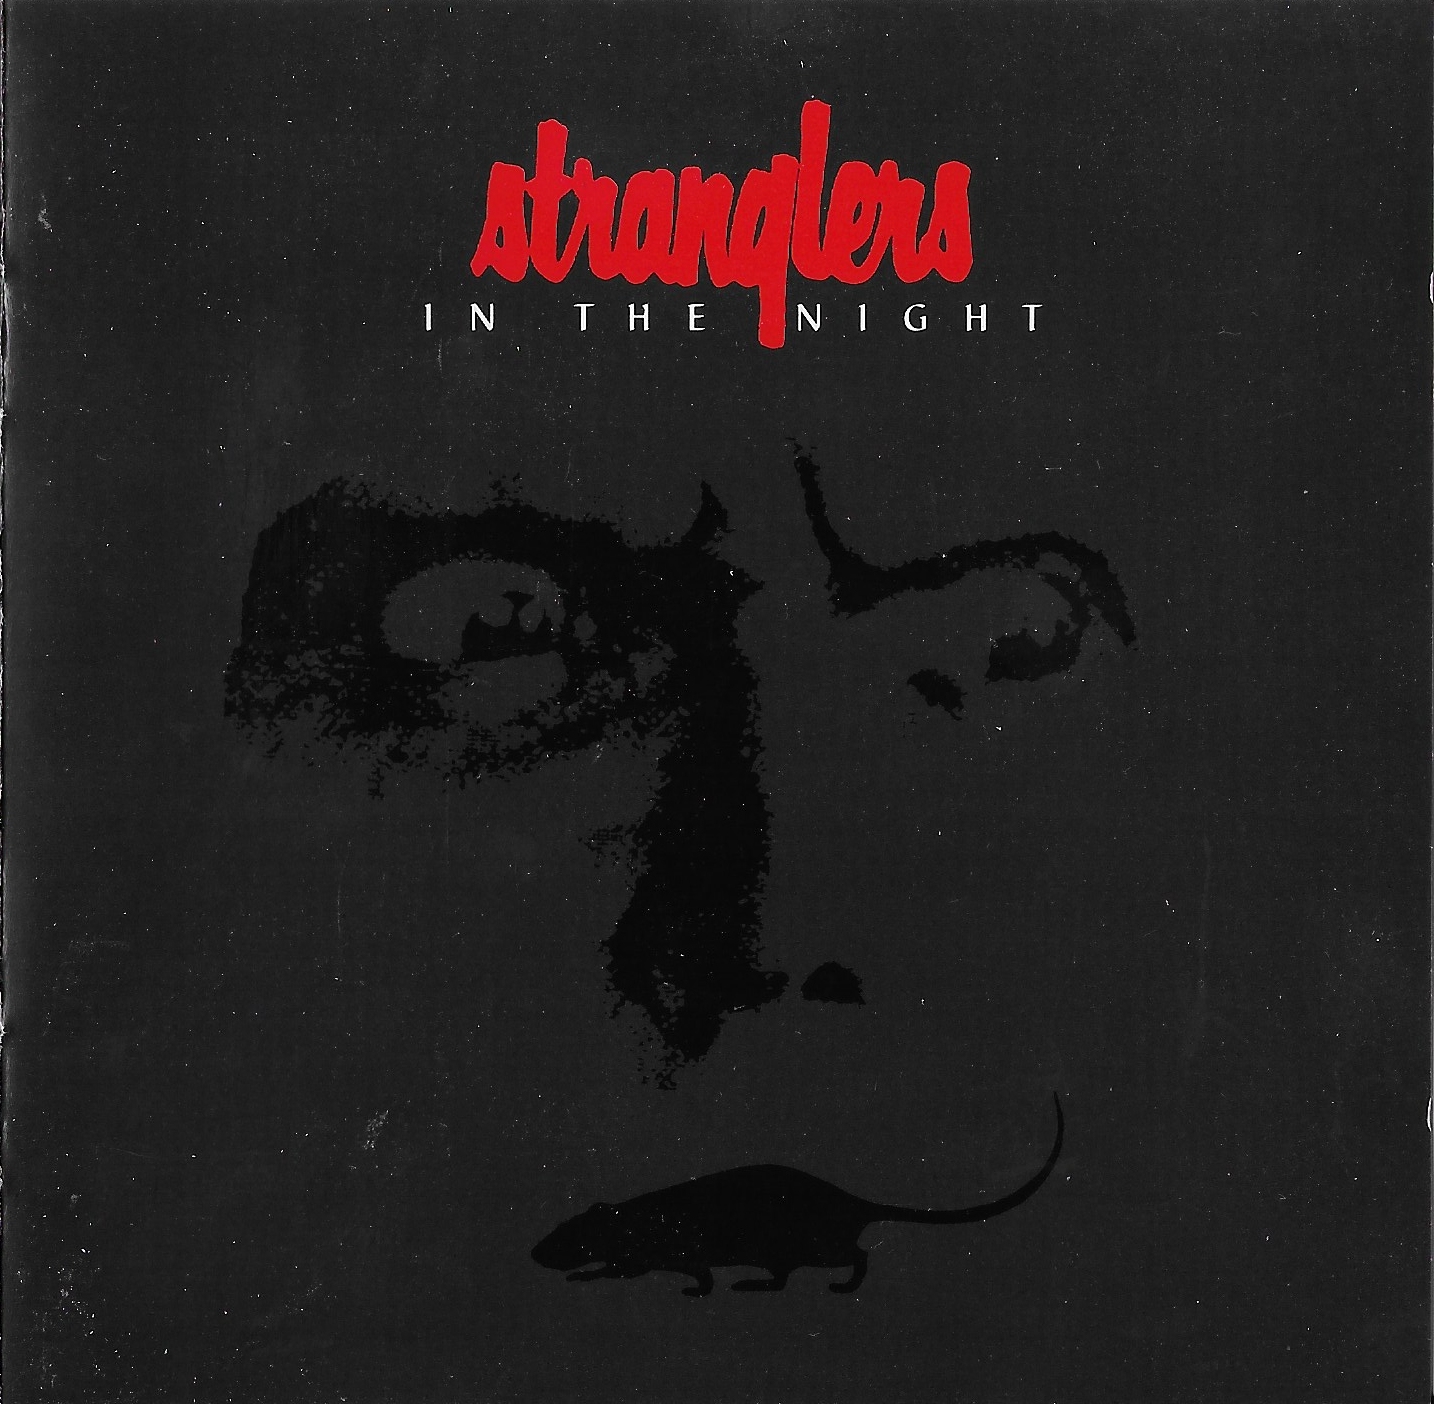 Picture of V 600385 Stranglers in the night by artist The Stranglers from The Stranglers